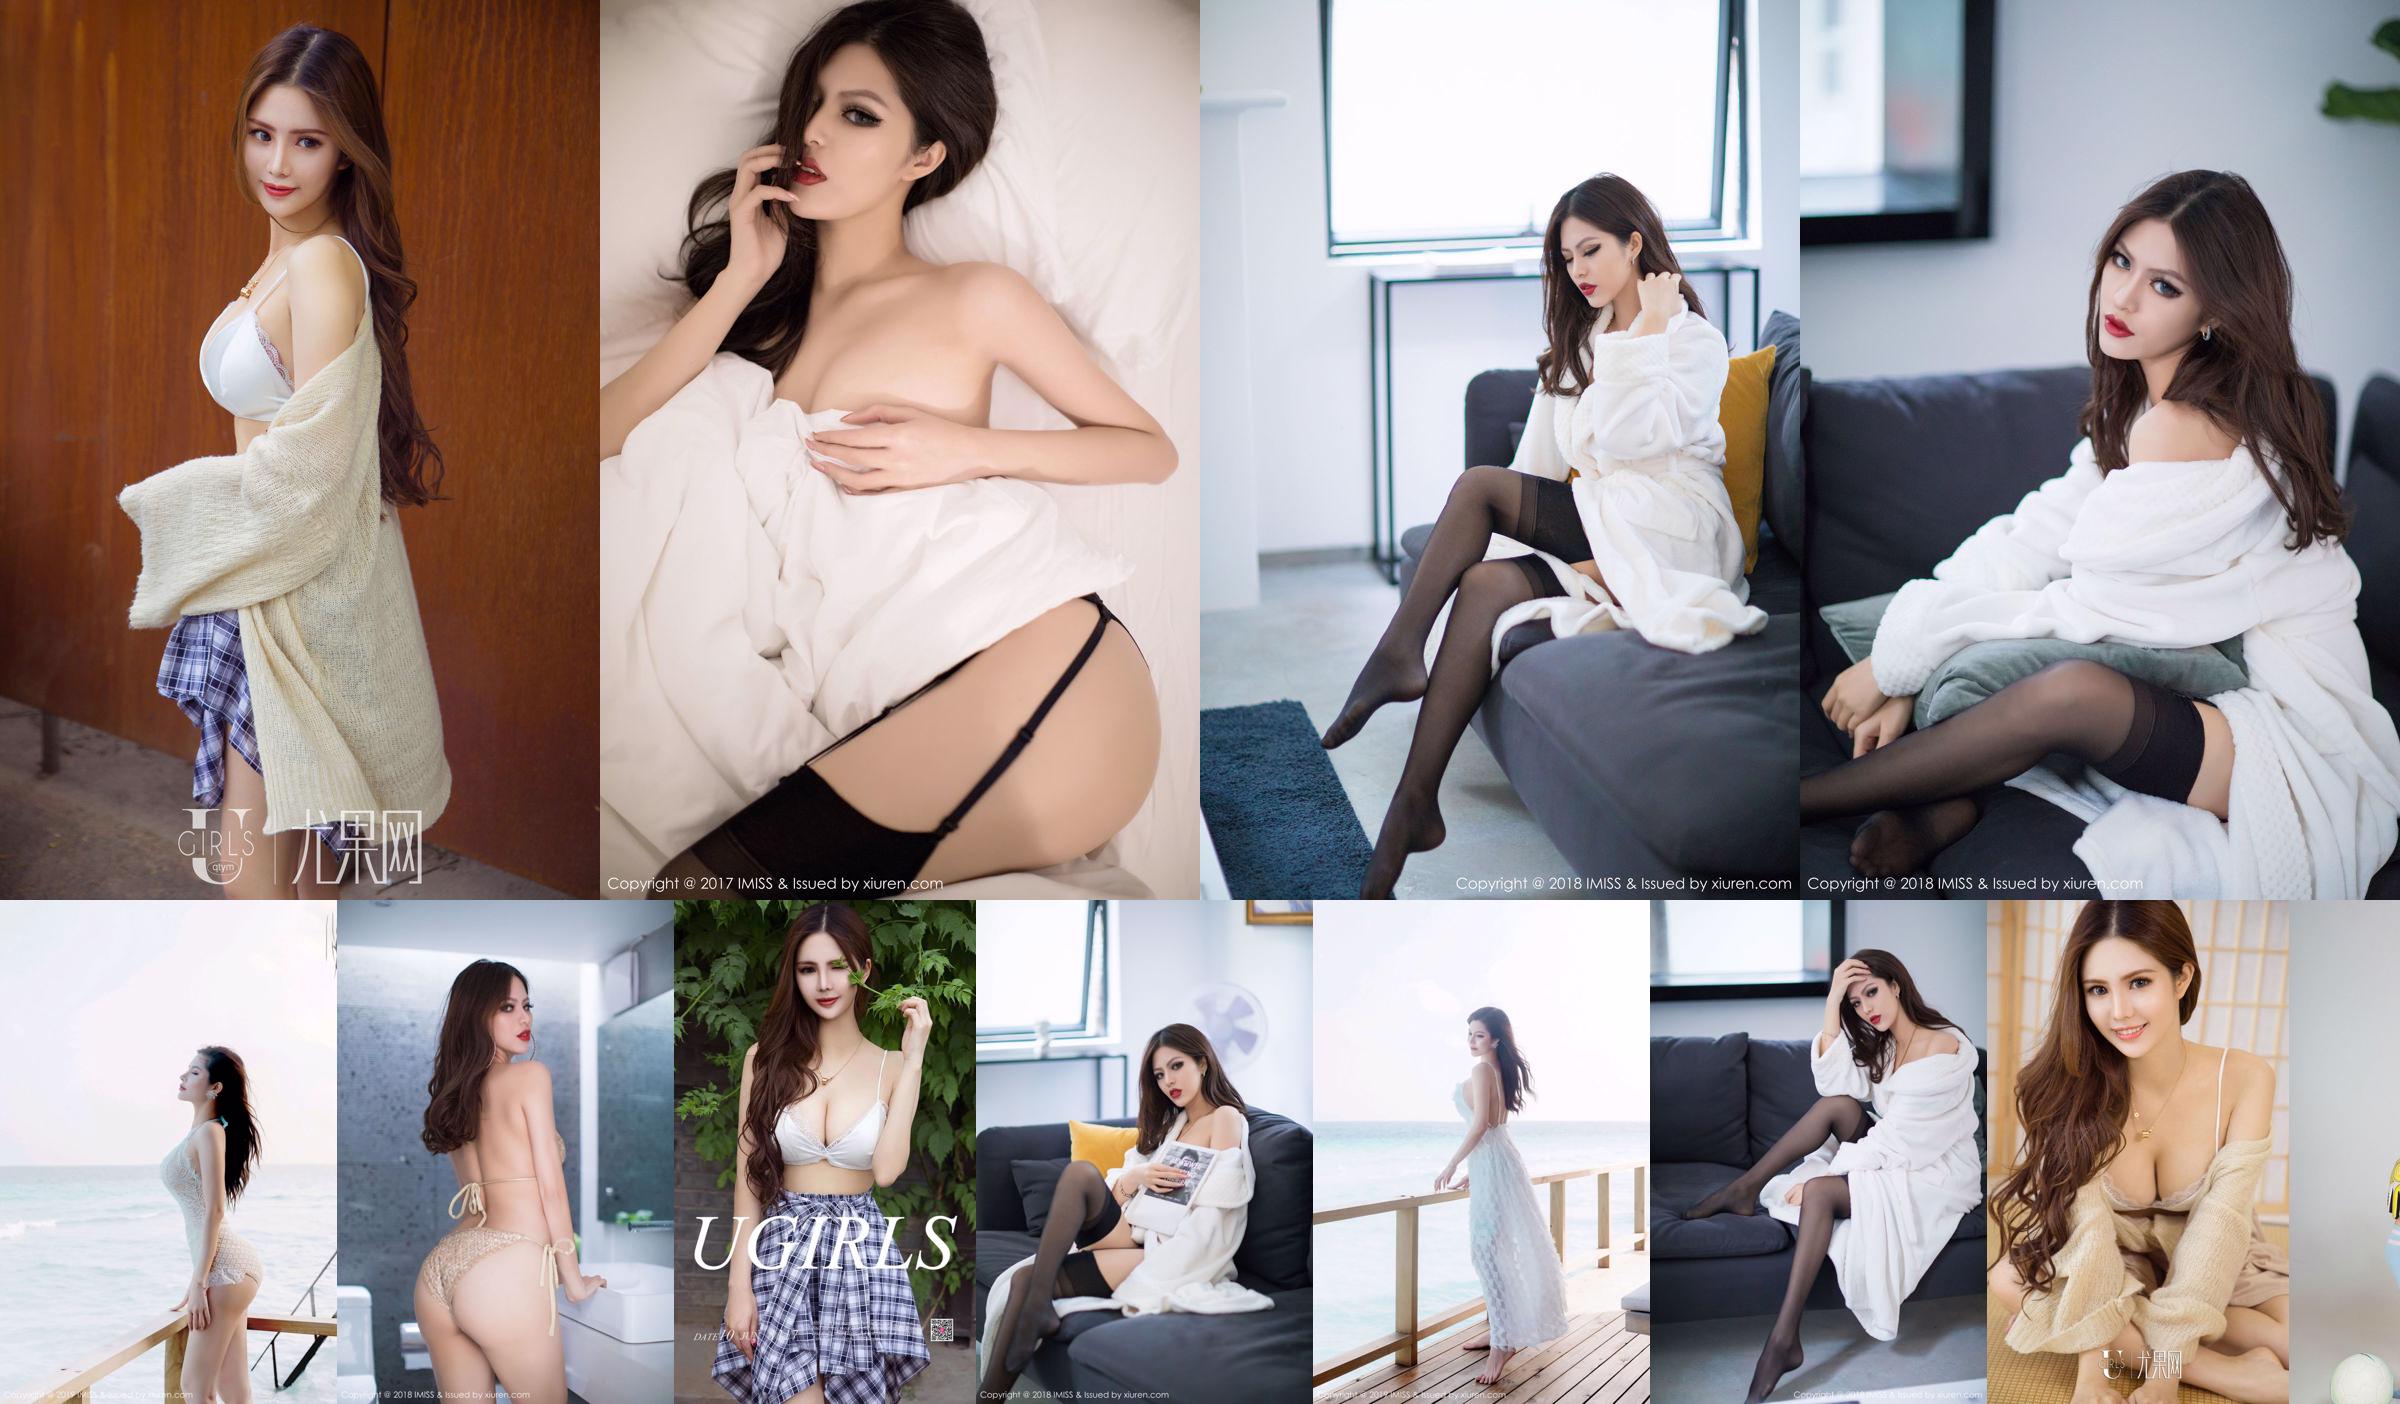 Ruotong boomboom "The Temptation of Sexy Legs in Stockings" [爱蜜社IMiss] VOL.207 No.ed29e9 Page 12